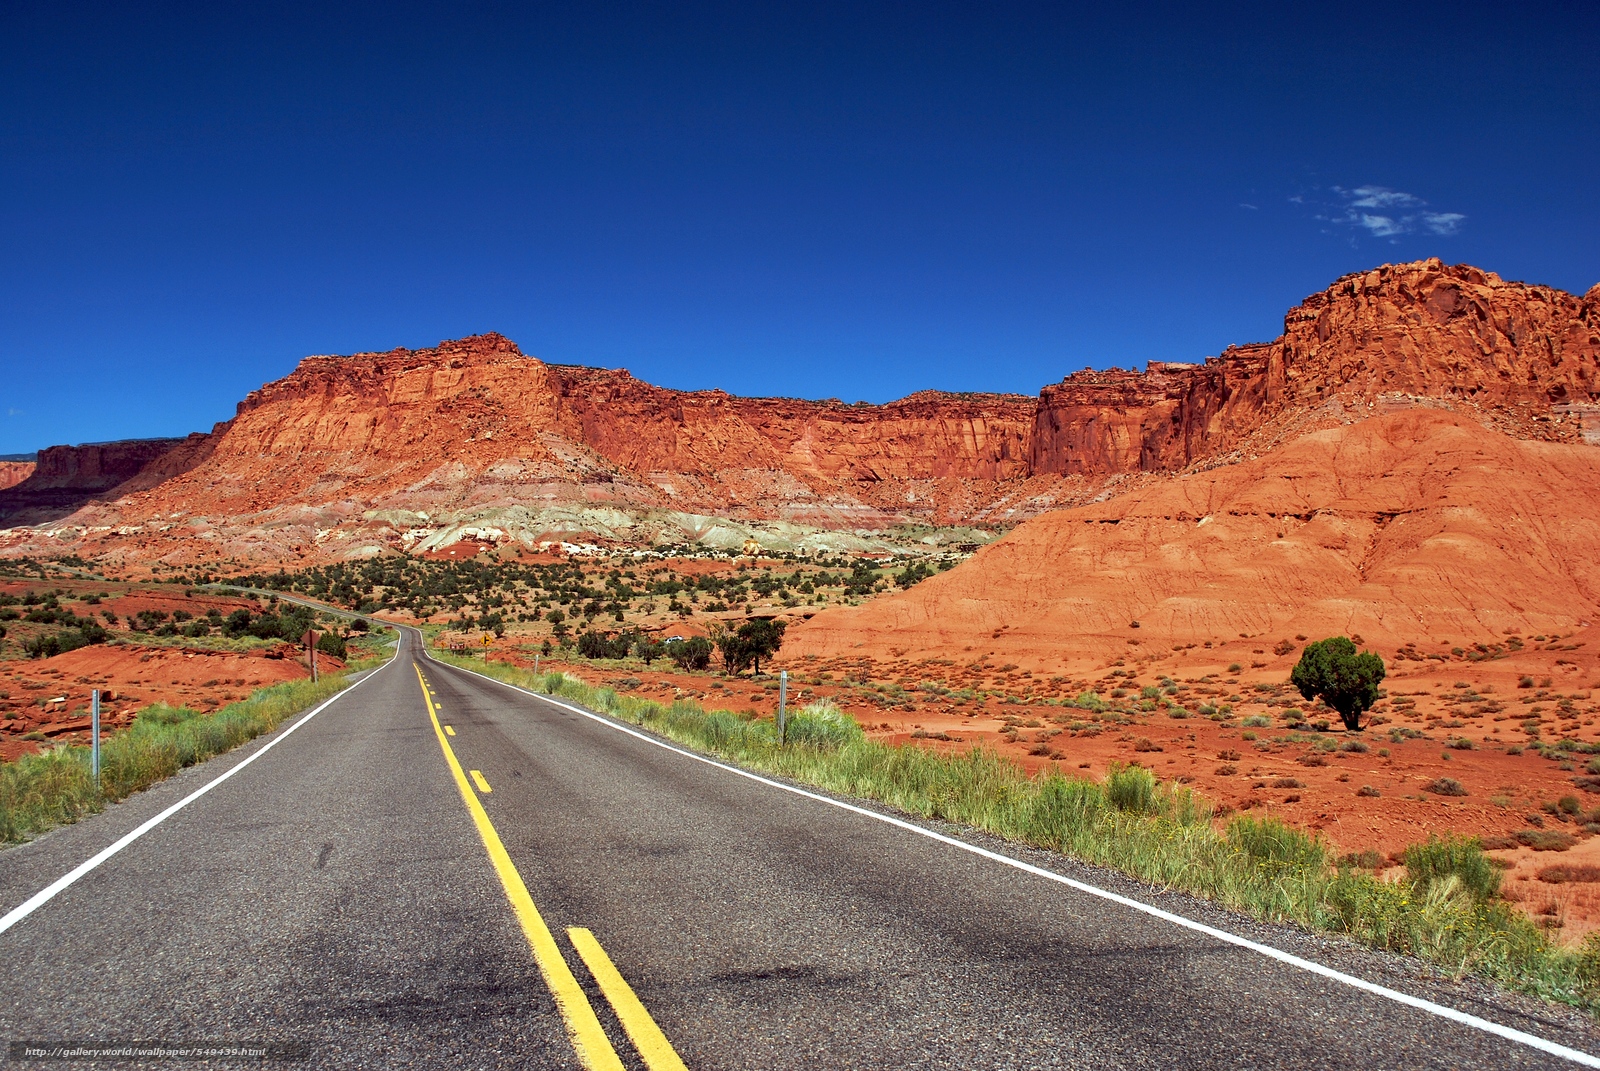 Capitol Reef National Park Wallpapers